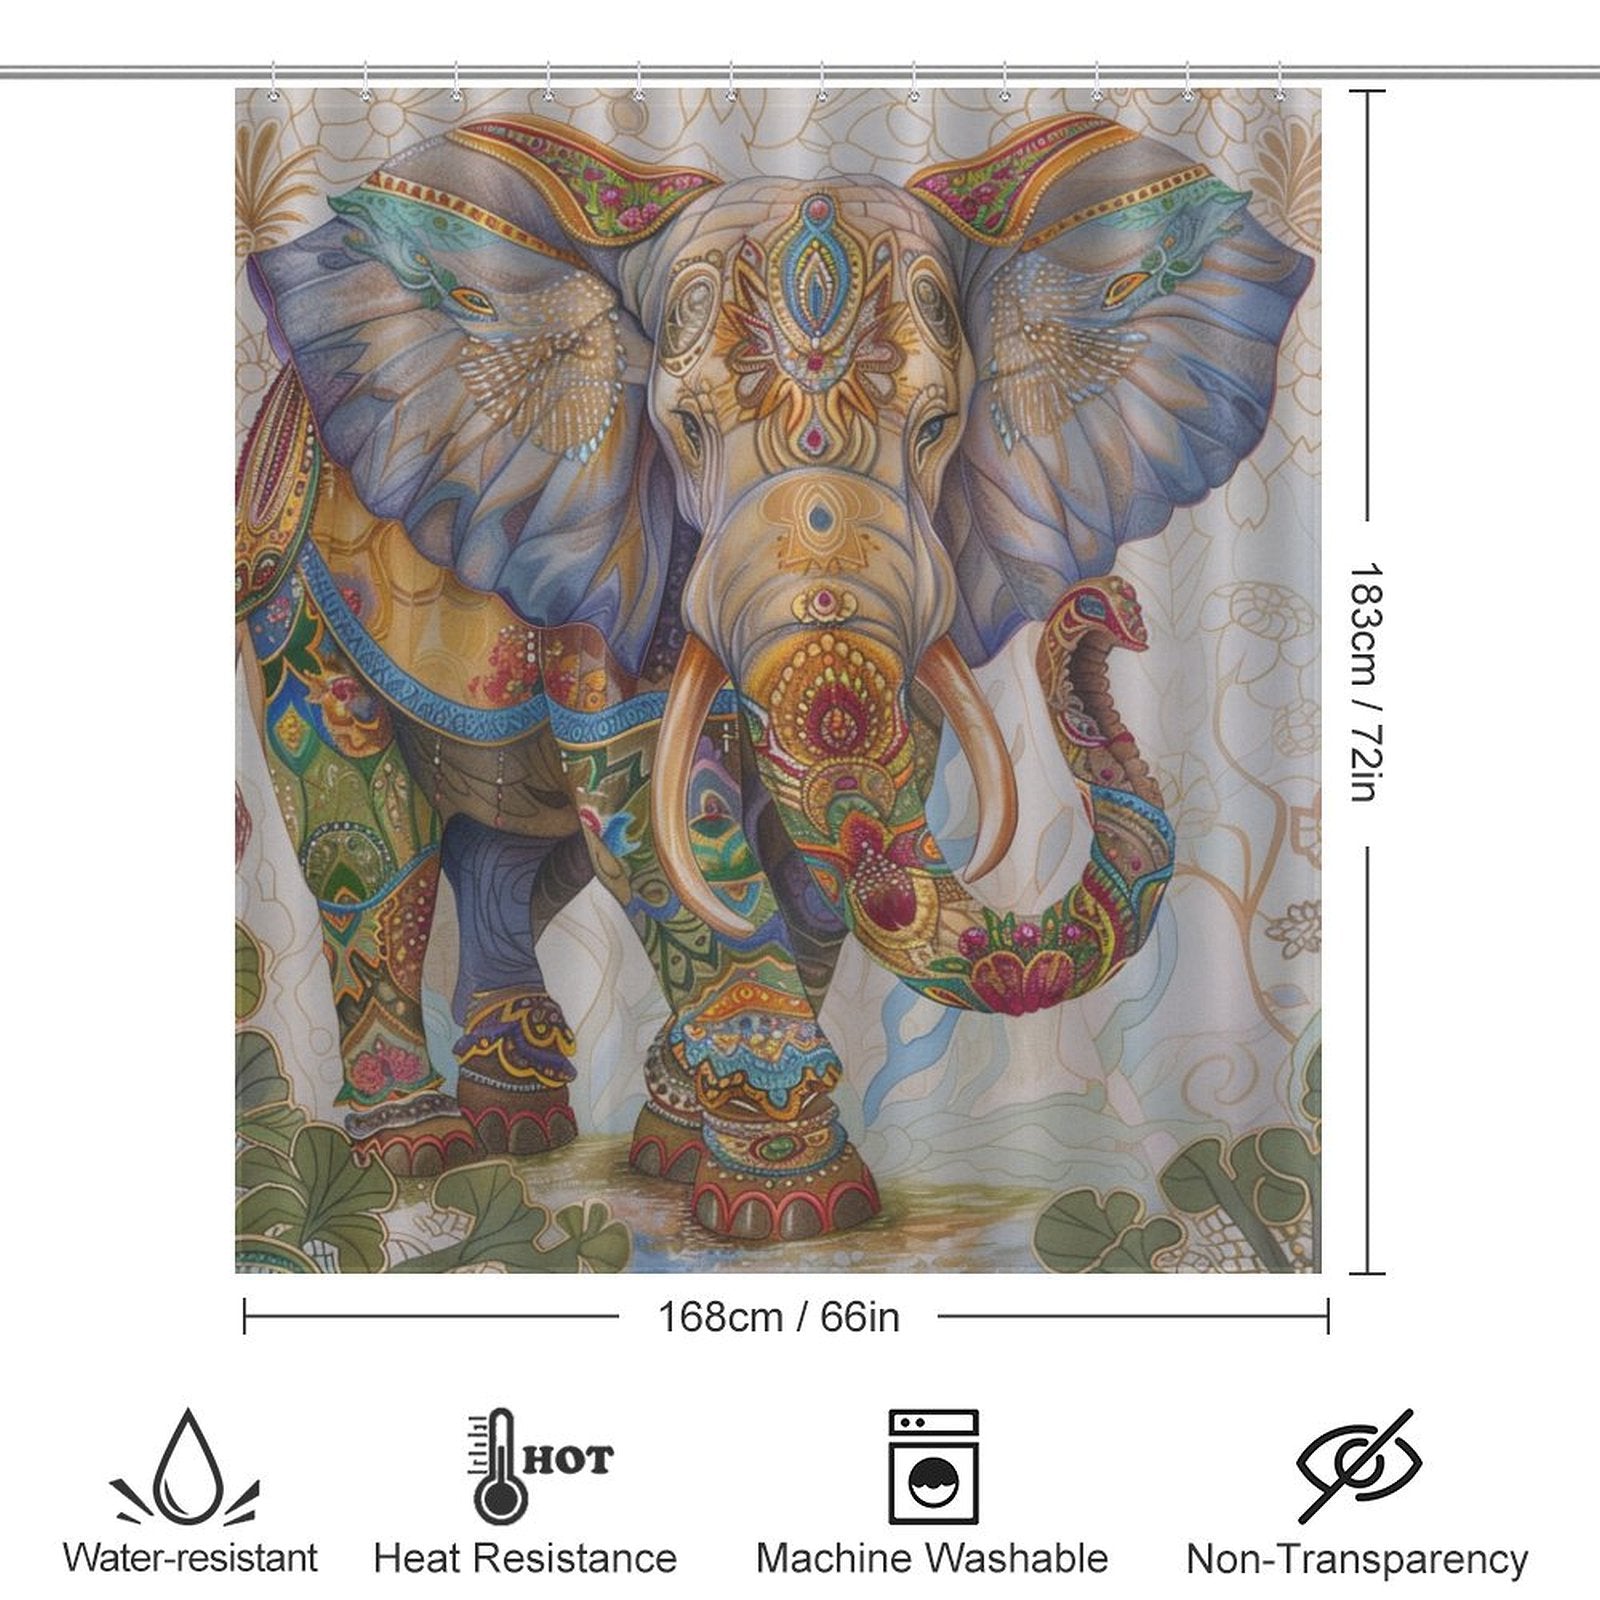 A colorful, elephant-themed shower curtain with intricate Indian style designs, measuring 183 cm by 168 cm. This Exquisite India Style Elephant Shower Curtain-Cottoncat is water-resistant, heat-resistant, machine-washable, and non-transparent.